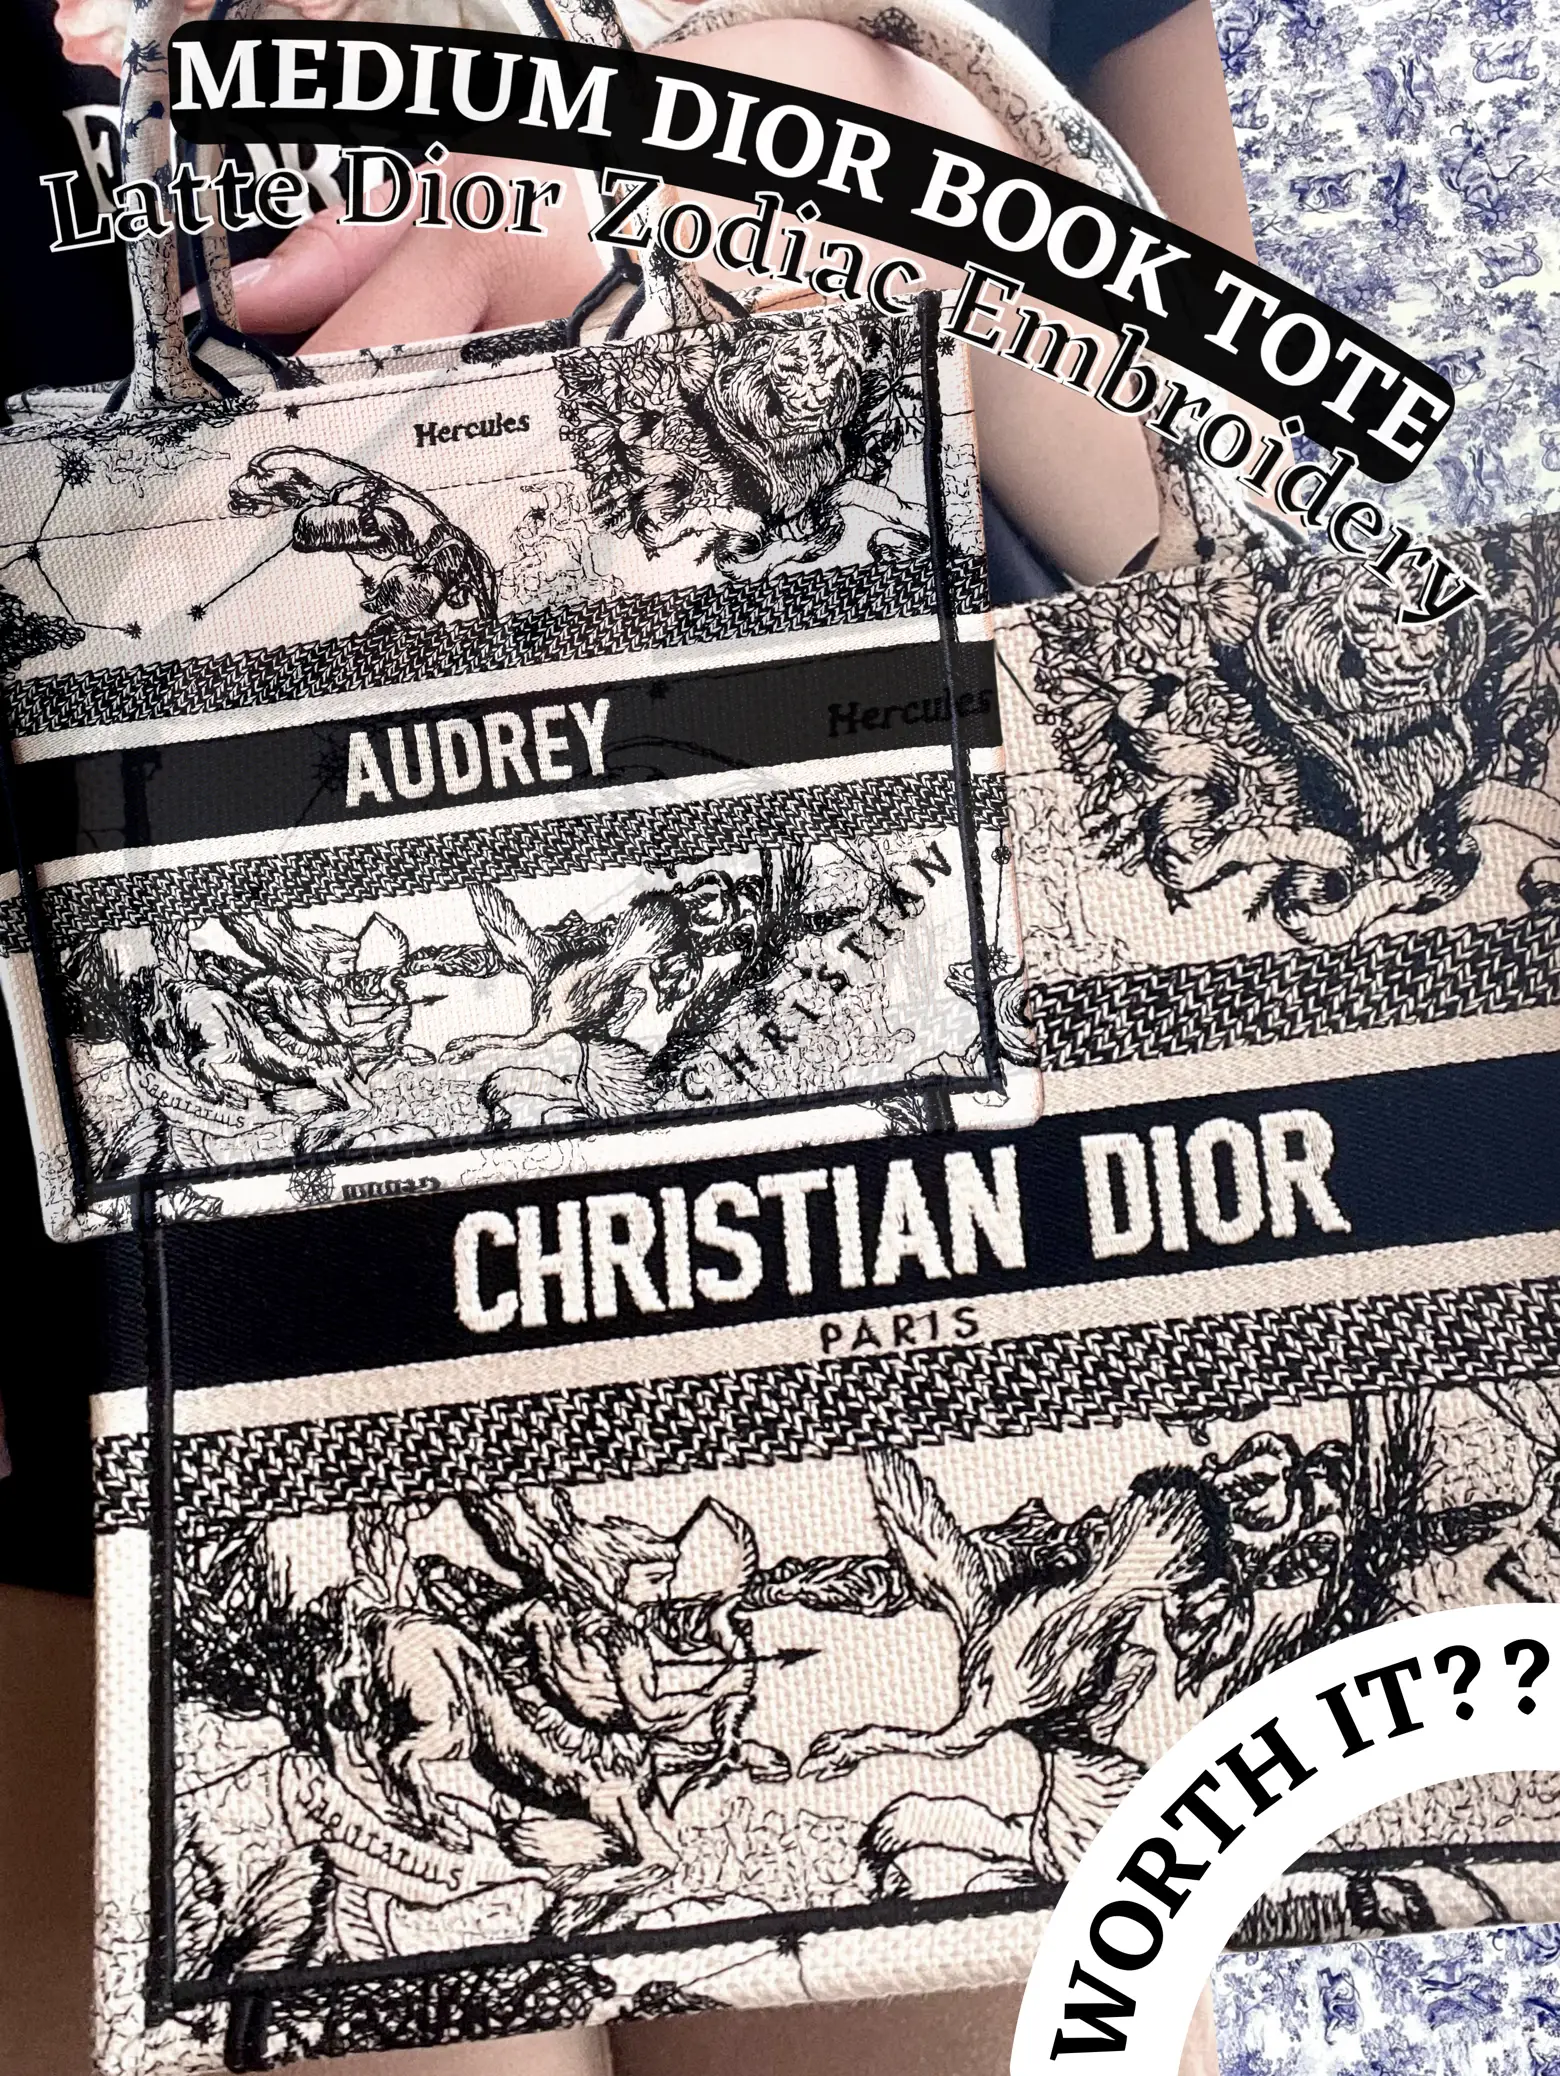 DIOR BOOK TOTE REVIEW Pro's & Con's, IS IT STILL WORTH BUYING? 🚨